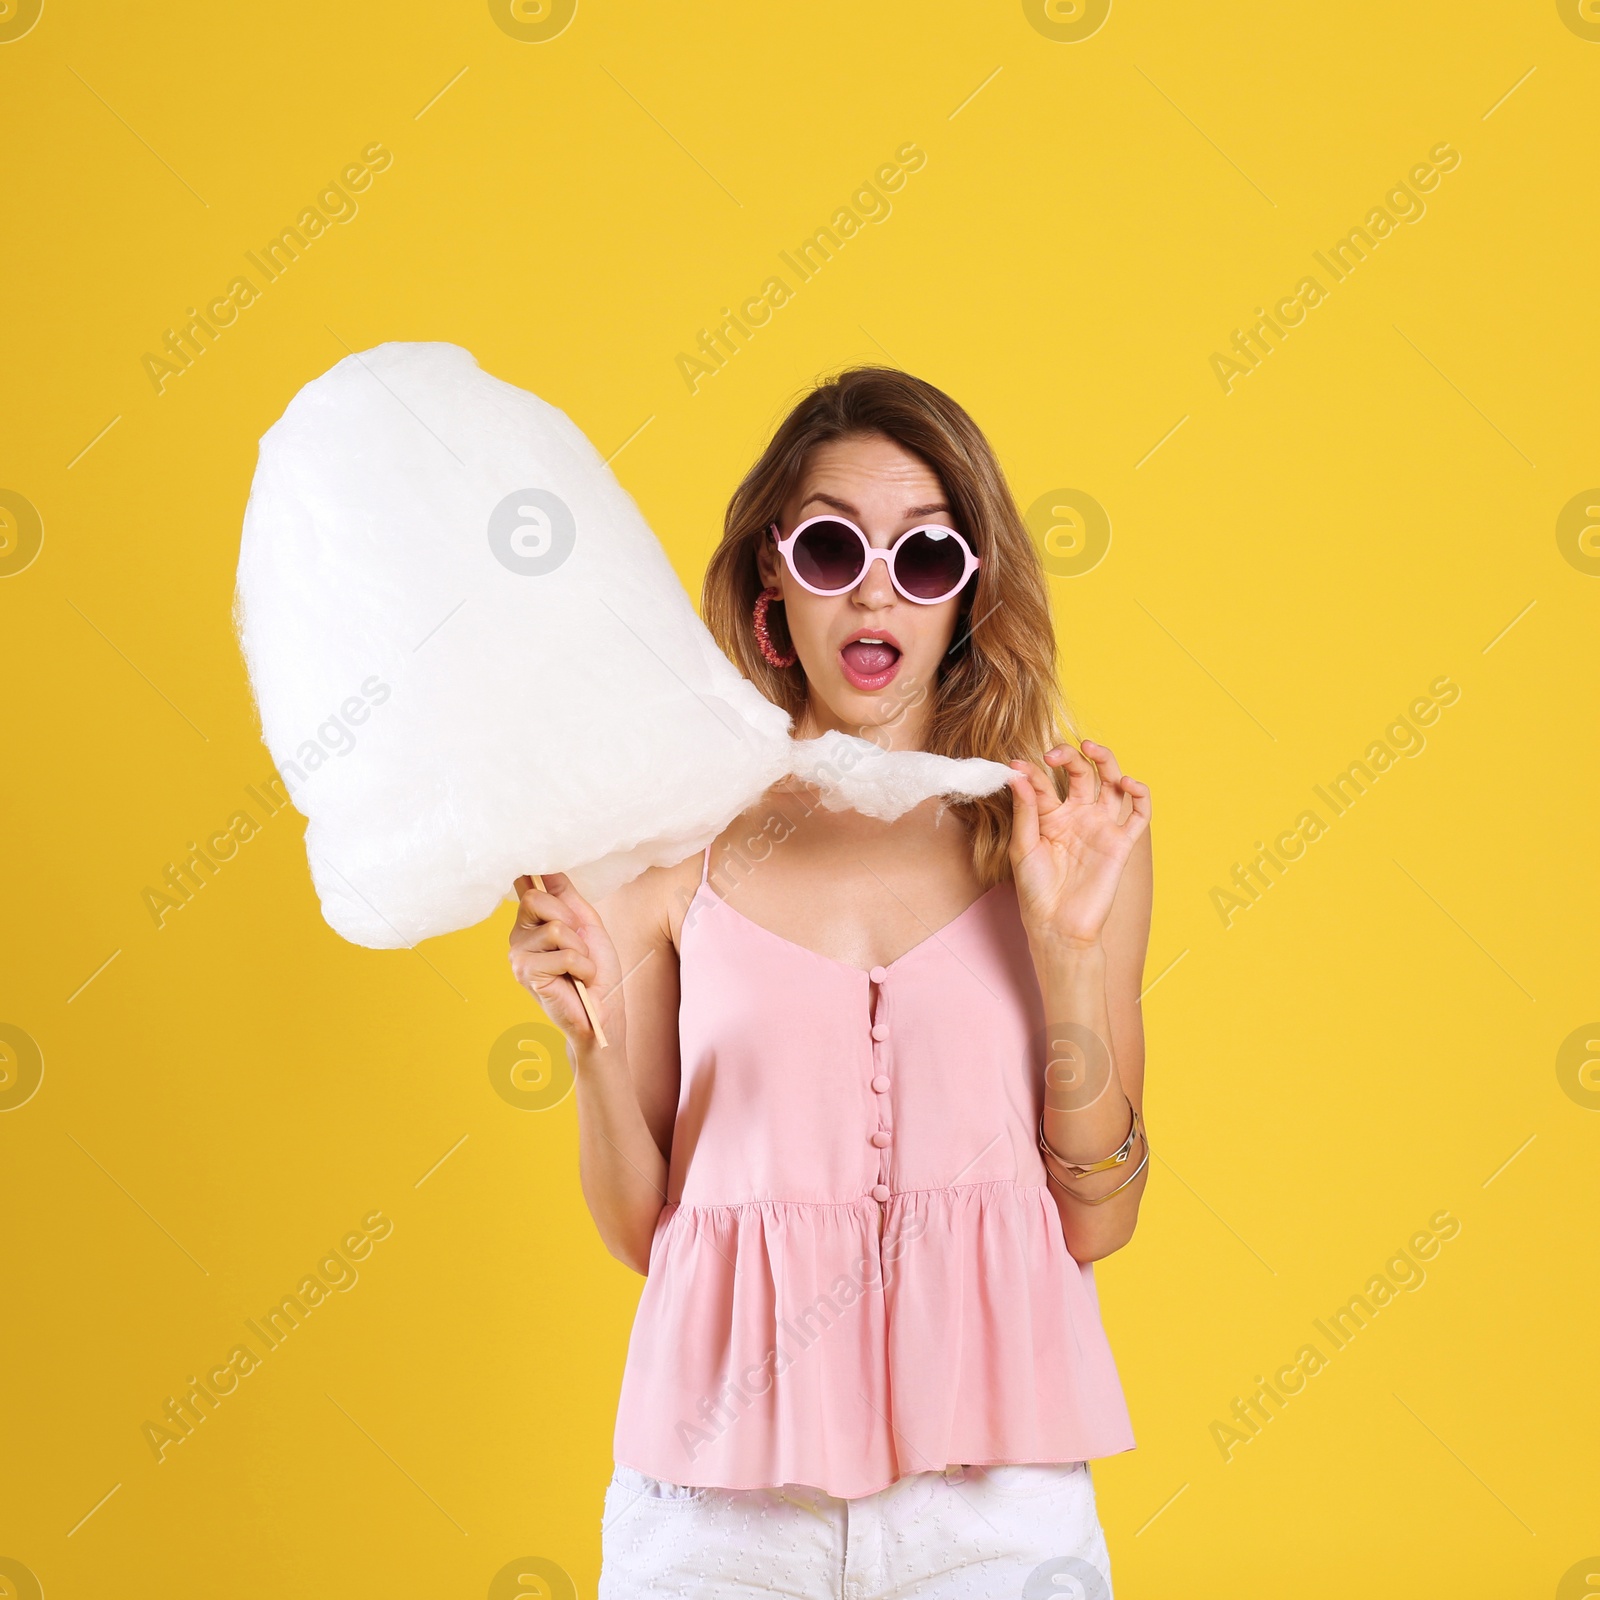 Photo of Emotional young woman with cotton candy on yellow background